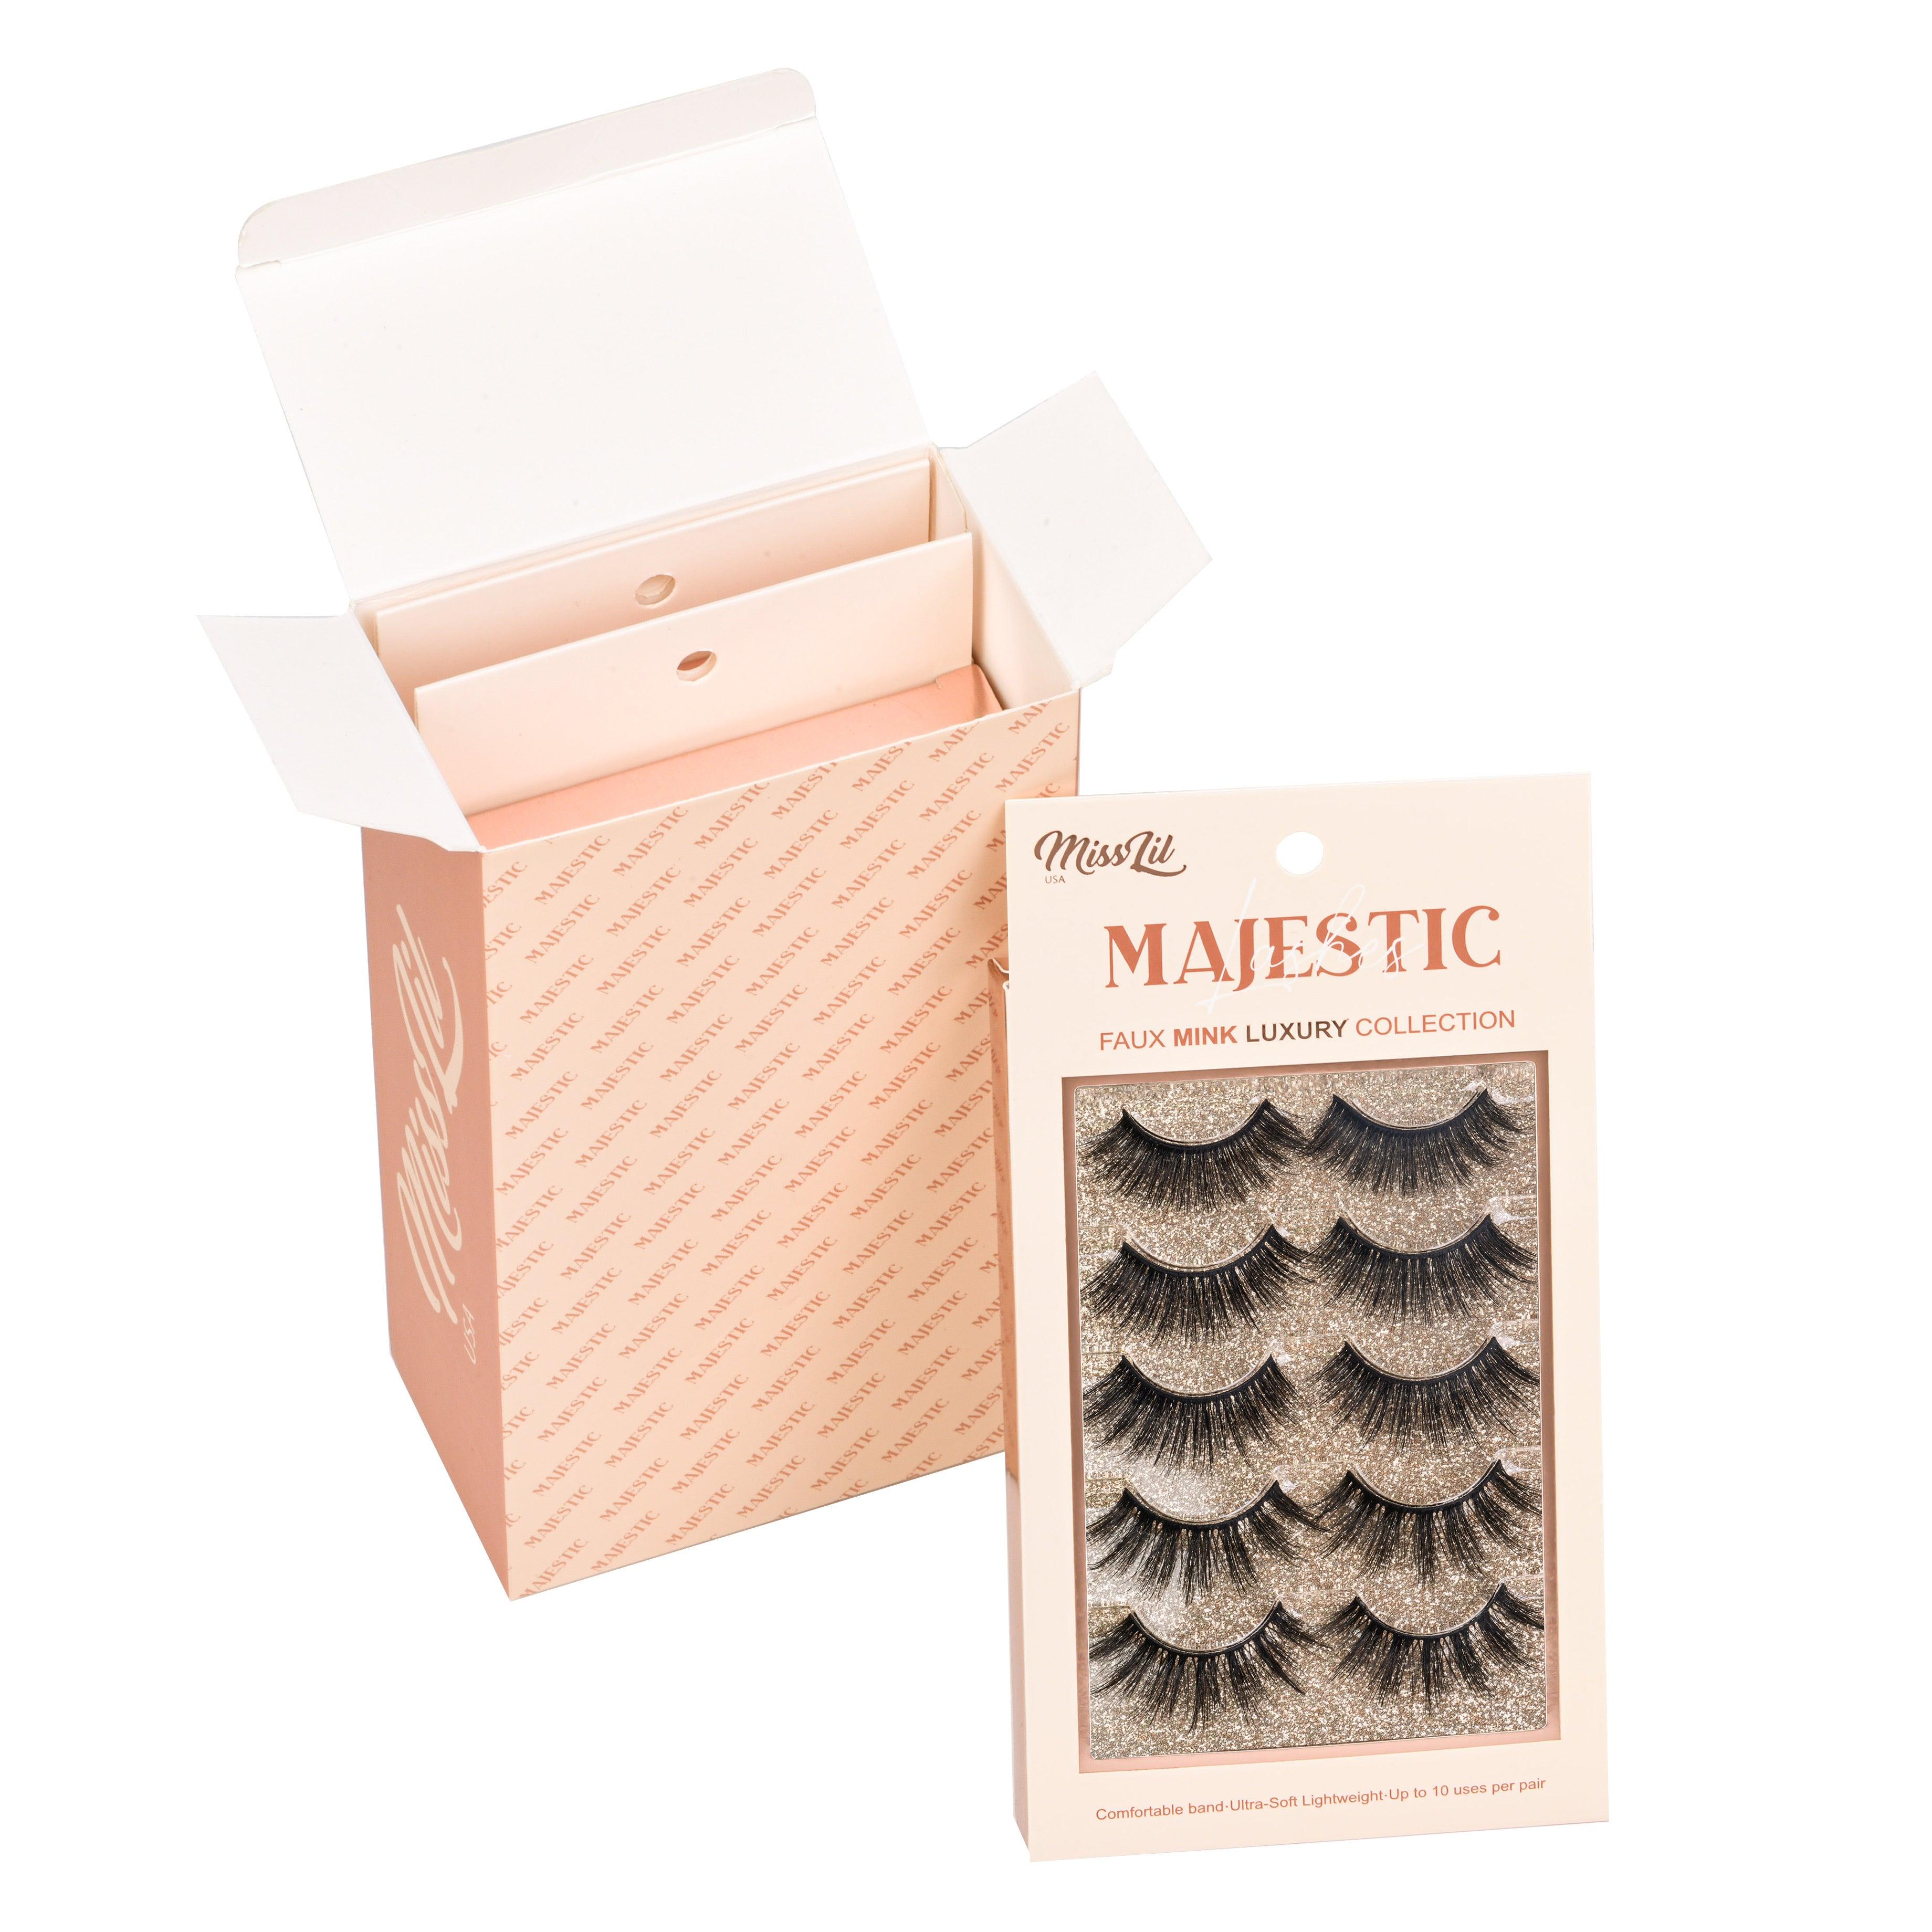 5 Pairs Majestic Lashes #5 (Pack of 6) - Miss Lil USA Wholesale